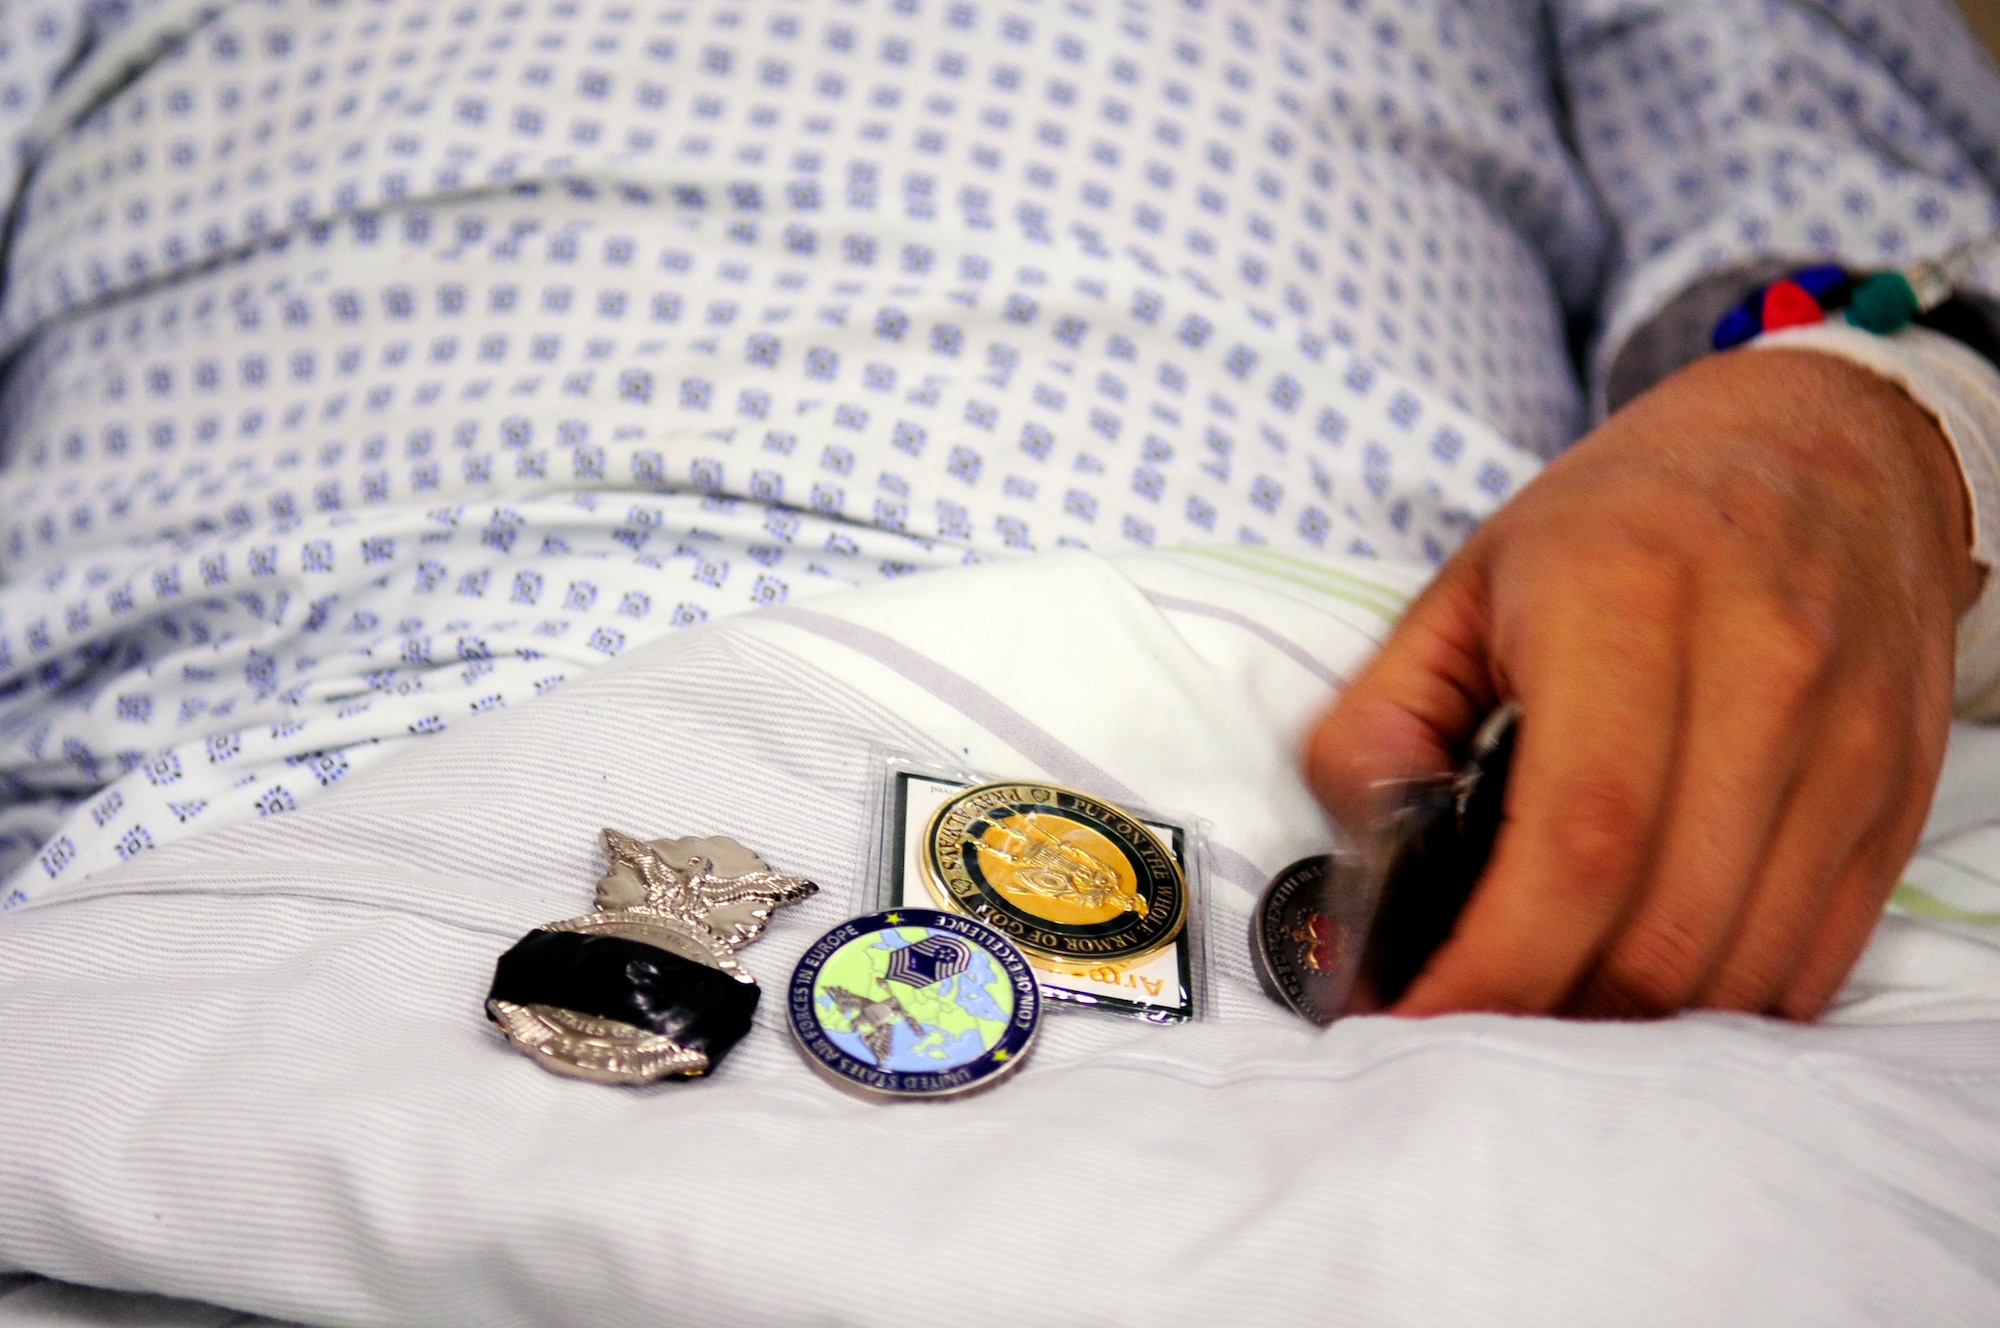 Senior Airman Edgar Veguilla, 48th Security Forces Squadron, sorts through coins he received while recovering from injuries sustained during the March 2, 2011, shooting at the Frankfurt International Airport, Germany. The RAF Lakenheath Airman was being treated at the Johann Wolfgang Goethe University Hospital in Frankfurt am Main. (U.S. Air Force photo by Tech. Sgt. Jocelyn L. Rich)